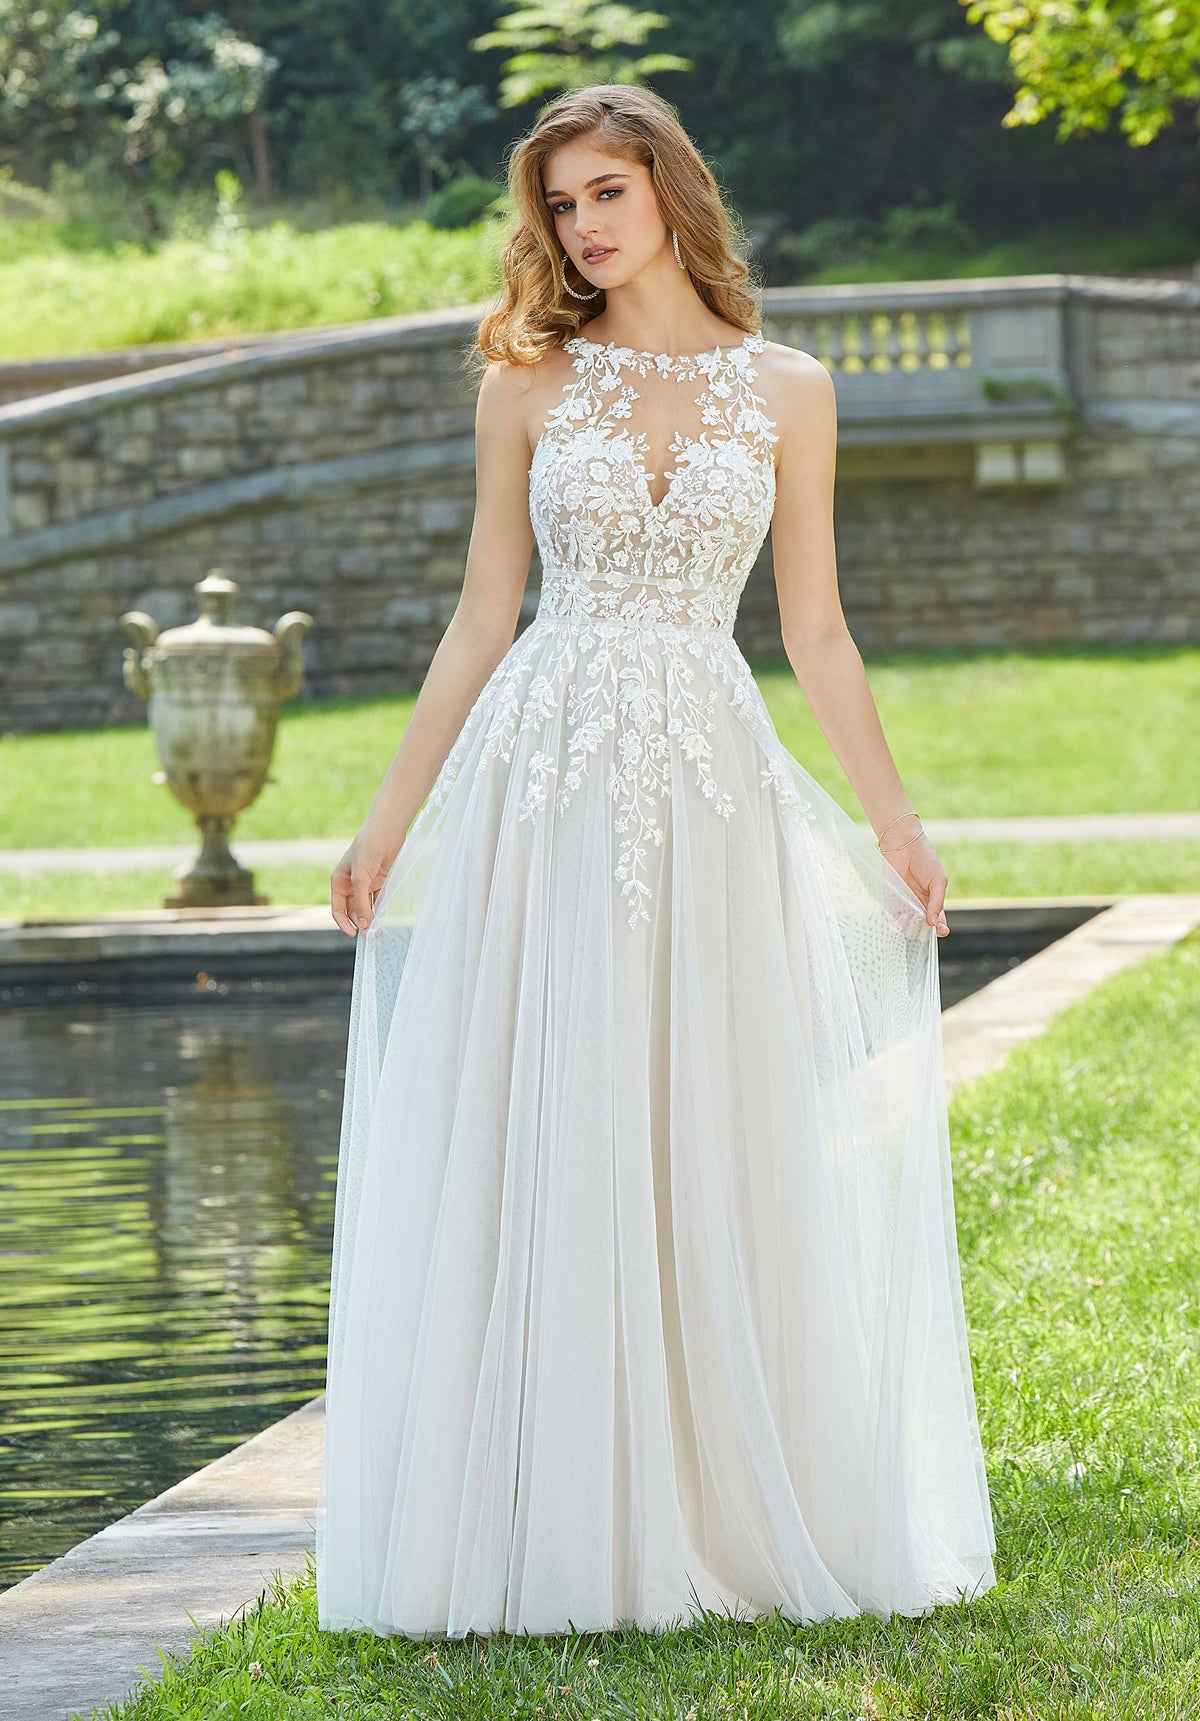 Voyage - 6966 - Devon - Cheron's Bridal, Wedding Gown - Morilee Voyage - - Wedding Gowns Dresses Chattanooga Hixson Shops Boutiques Tennessee TN Georgia GA MSRP Lowest Prices Sale Discount